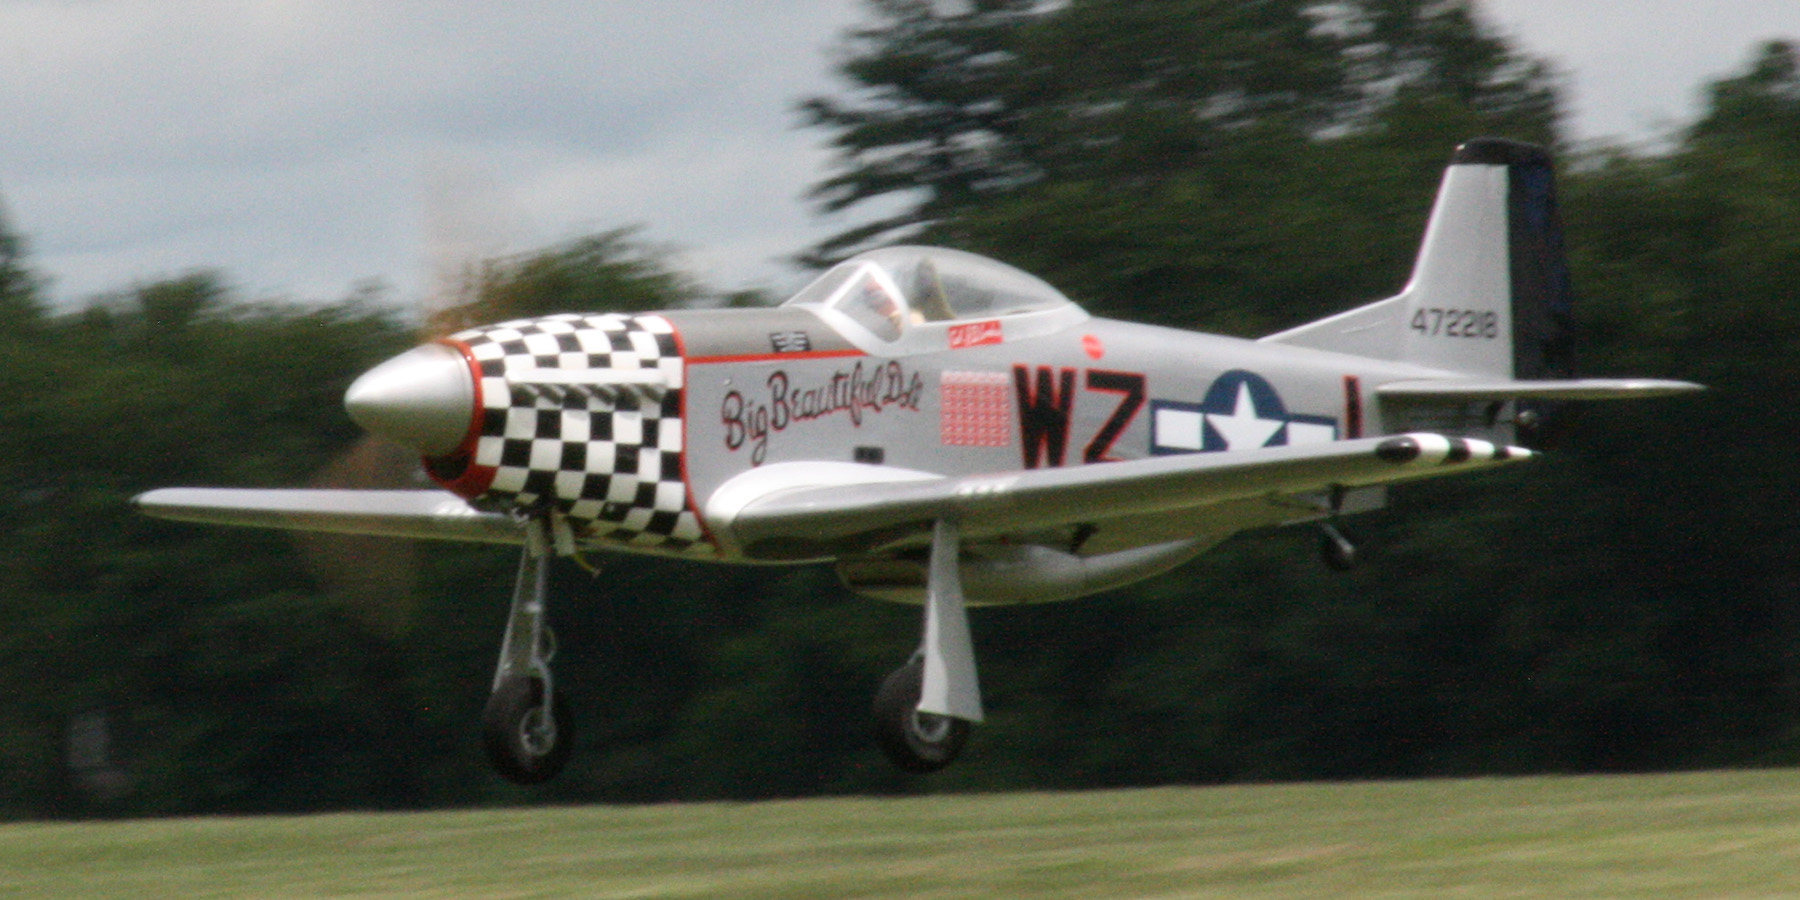 8.	One of several P-51s about to touch down. Alexander photo.